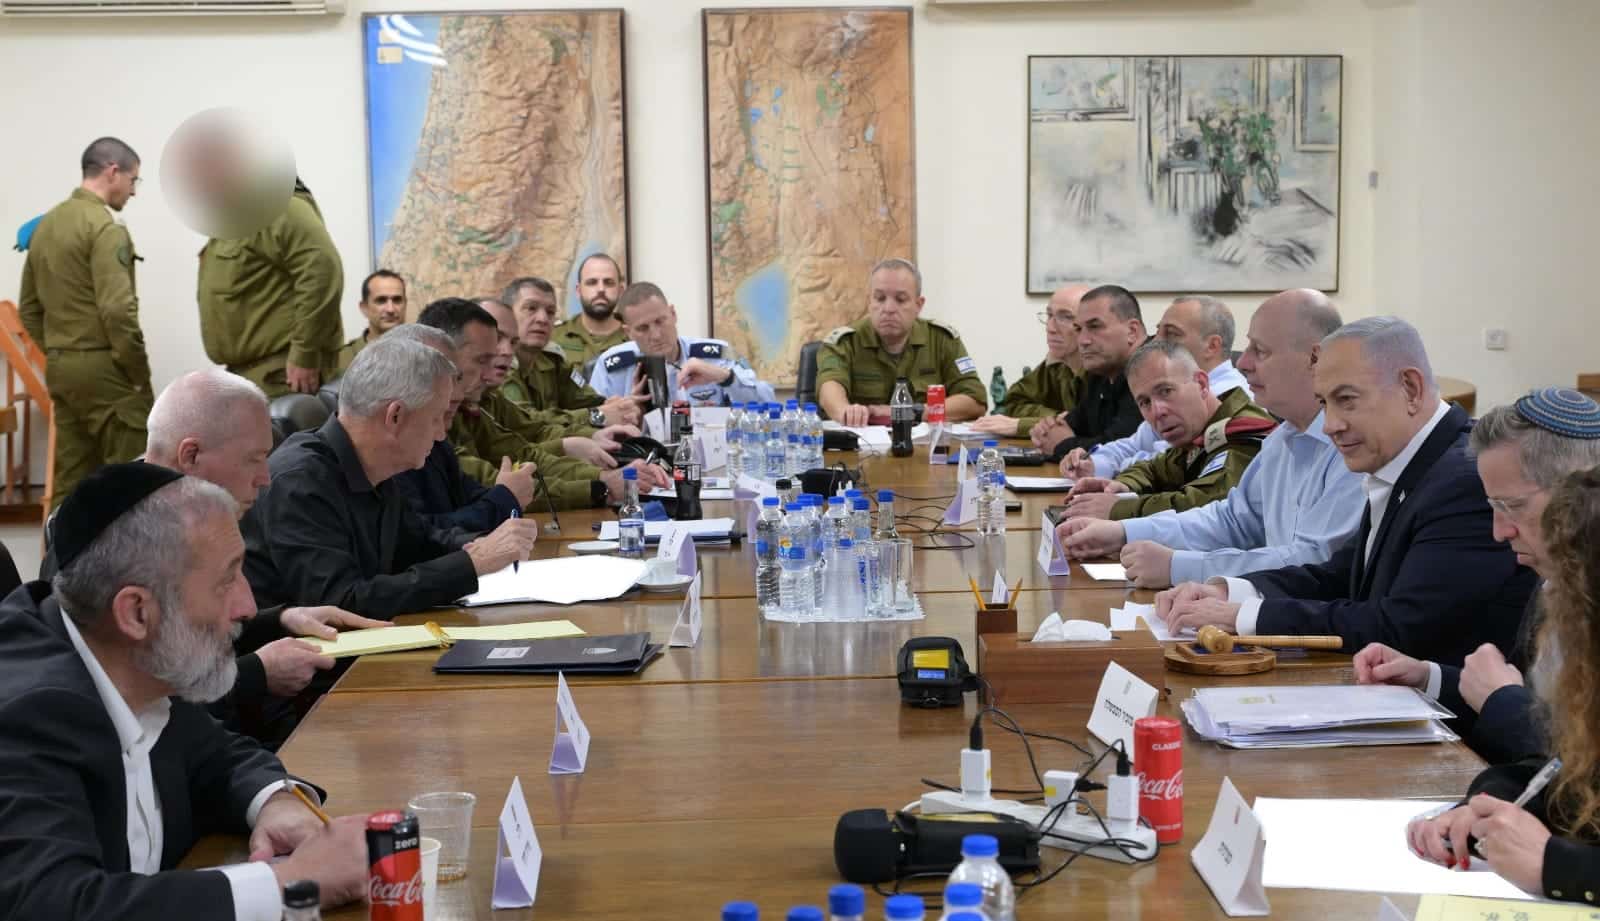 Israel’s war cabinet in Tel Aviv on April 14th after the Iranian attack